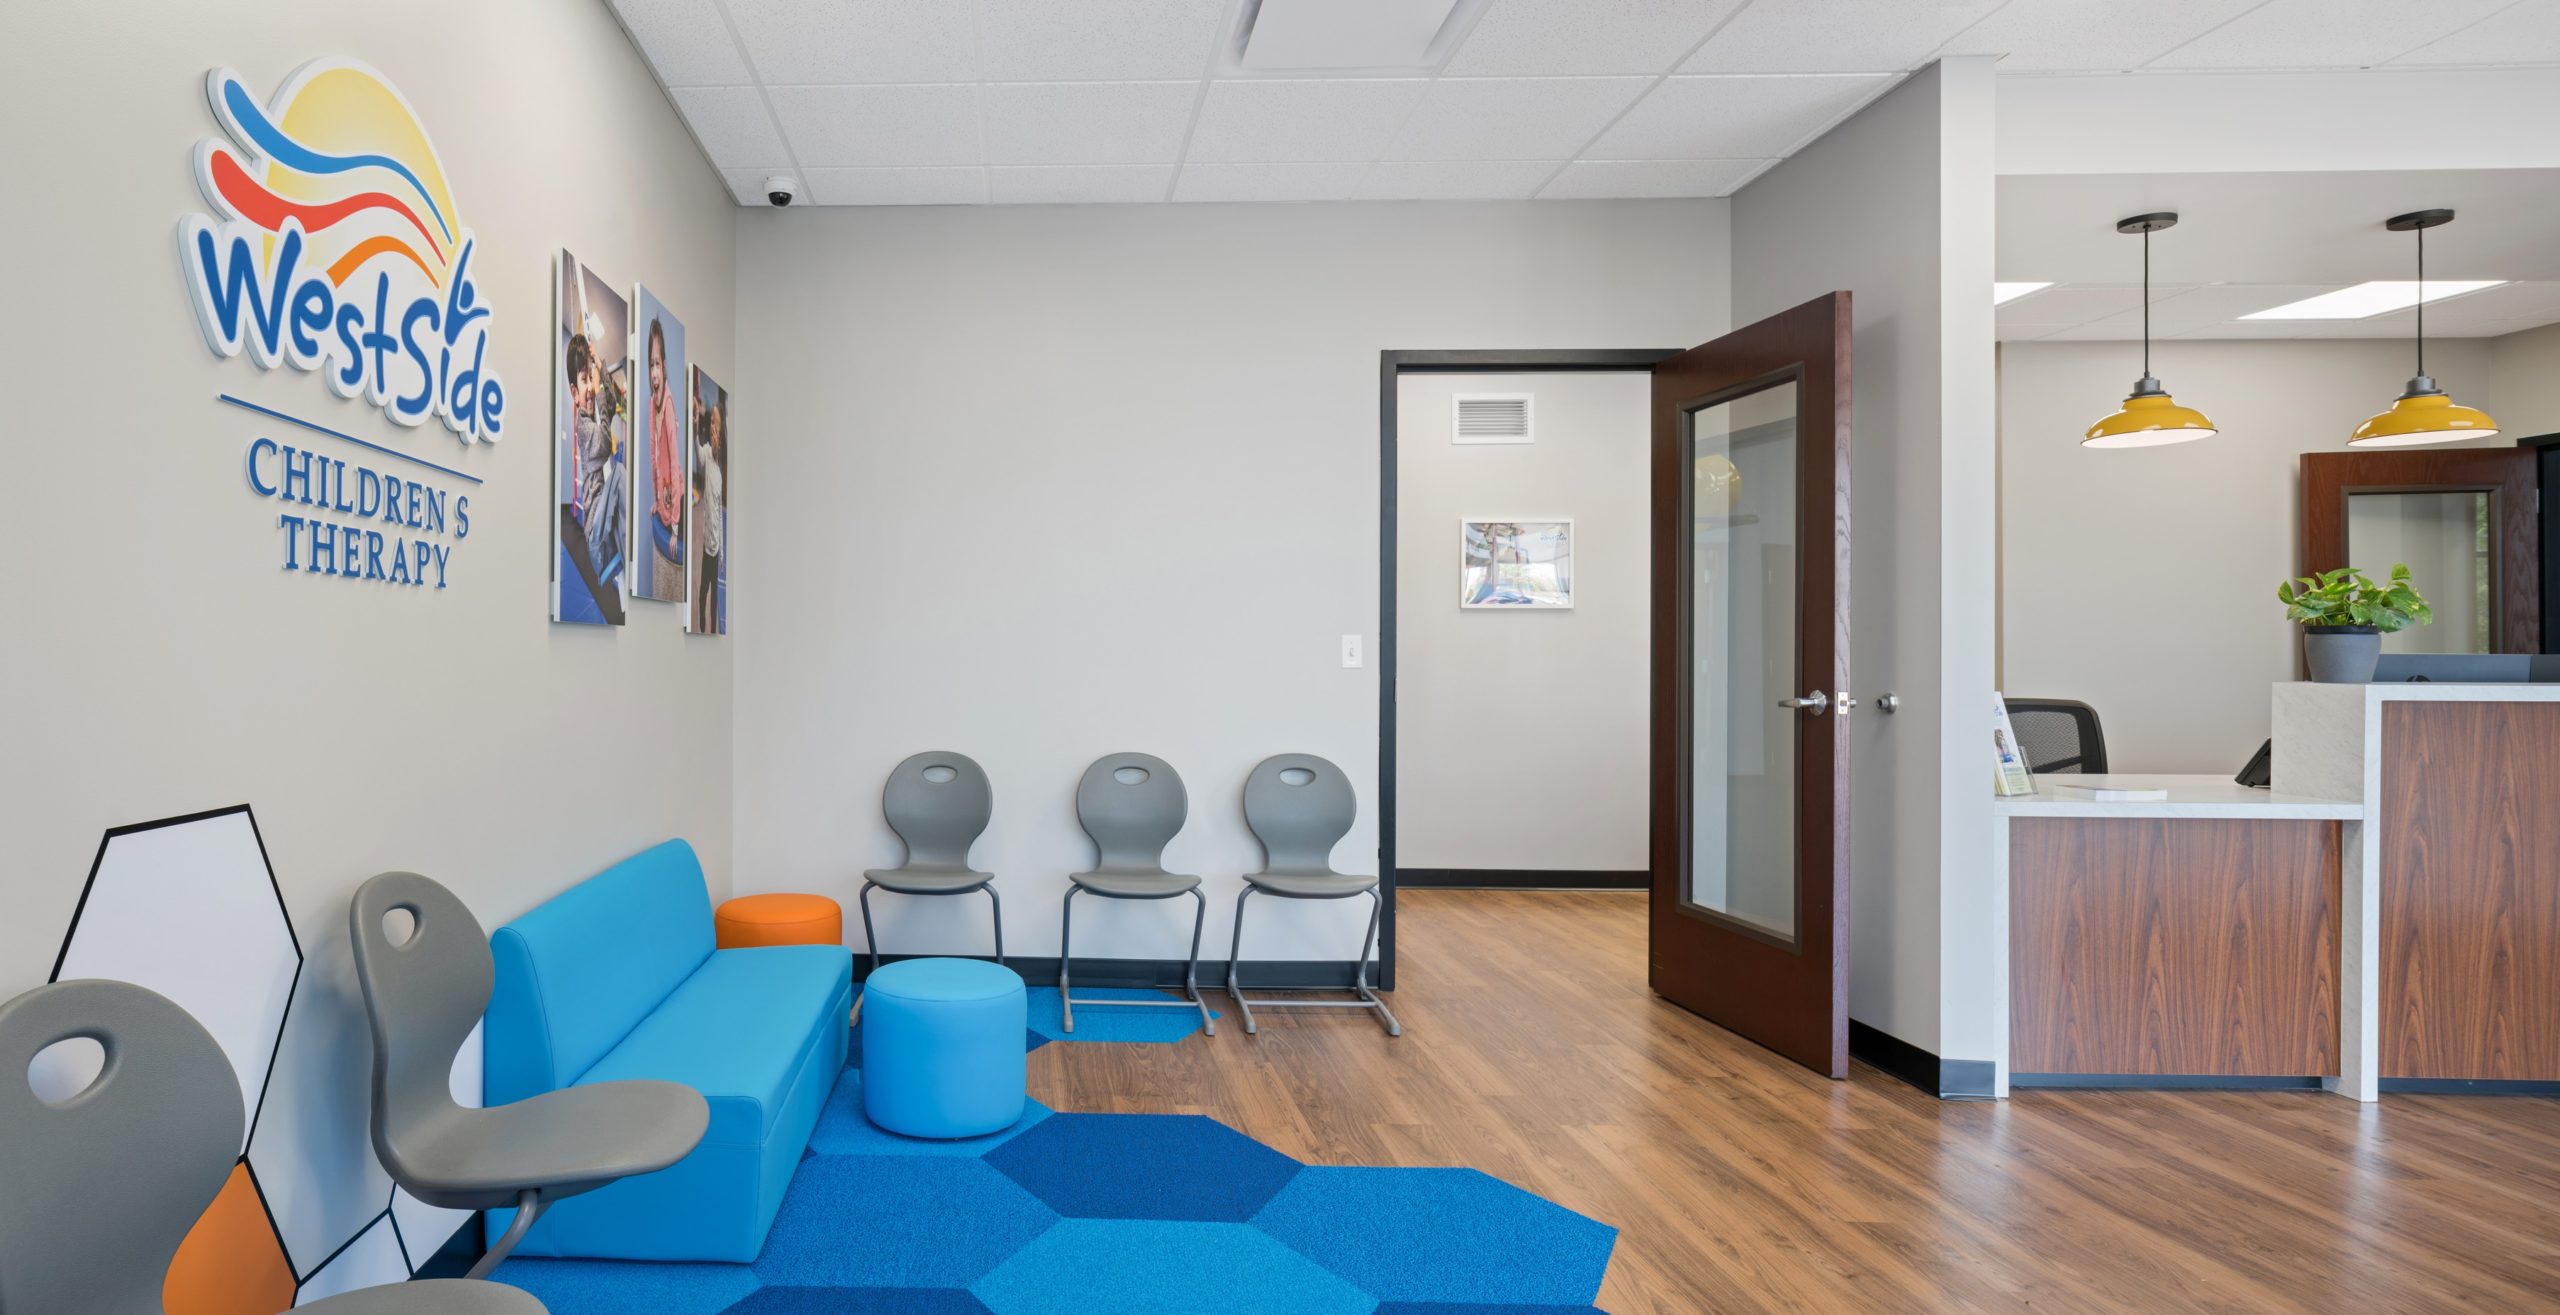 Photo of a waiting area at Westside Children's Therapy clinic in New Lenox Illinois